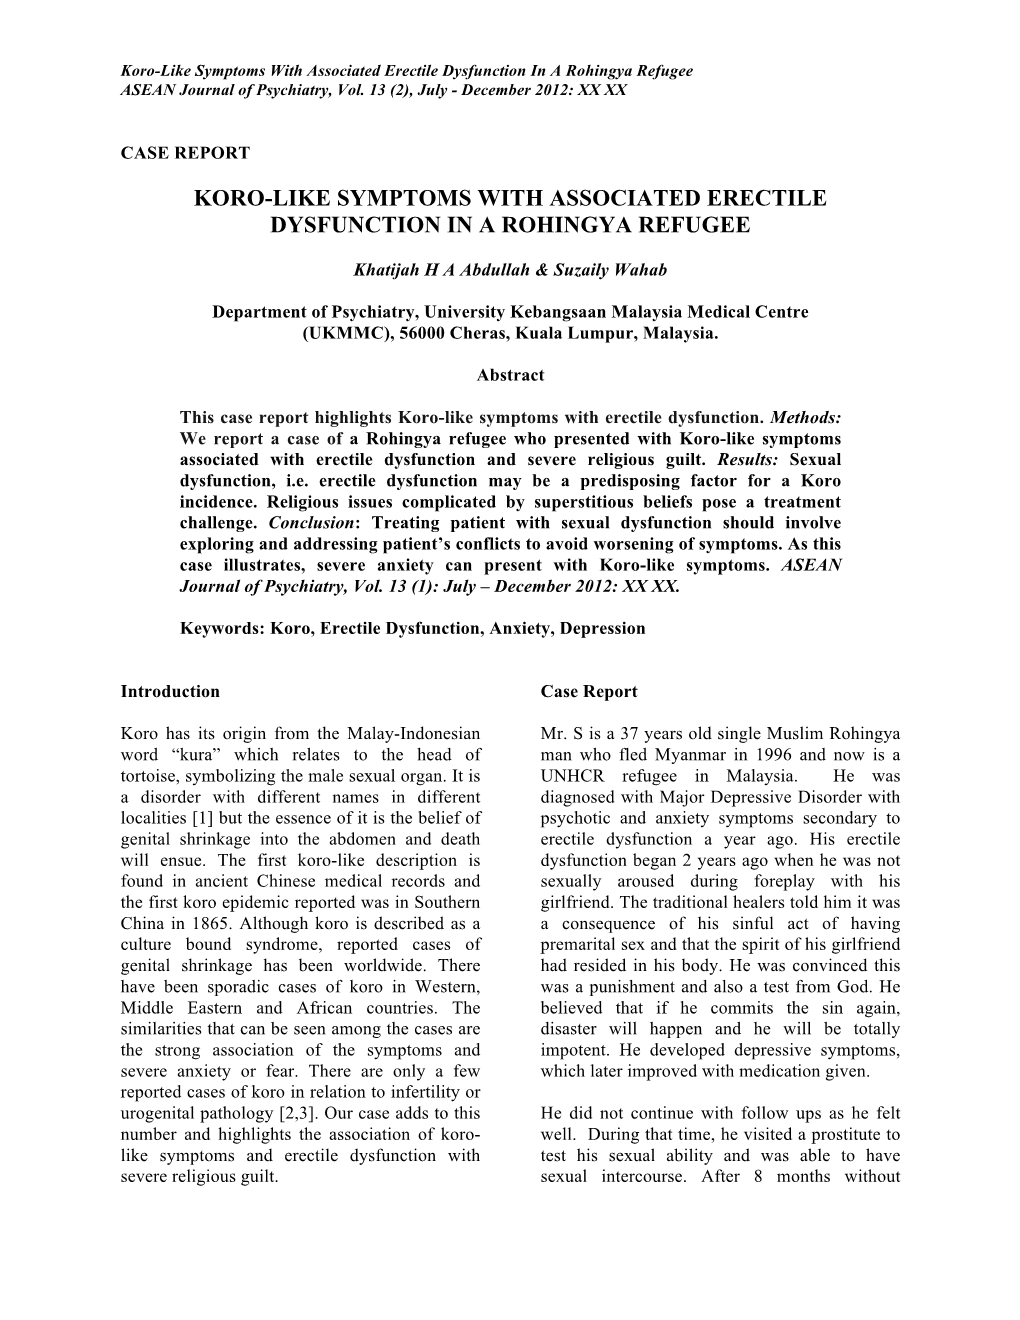 Koro-Like Symptoms with Associated Erectile Dysfunction in a Rohingya Refugee ASEAN Journal of Psychiatry, Vol